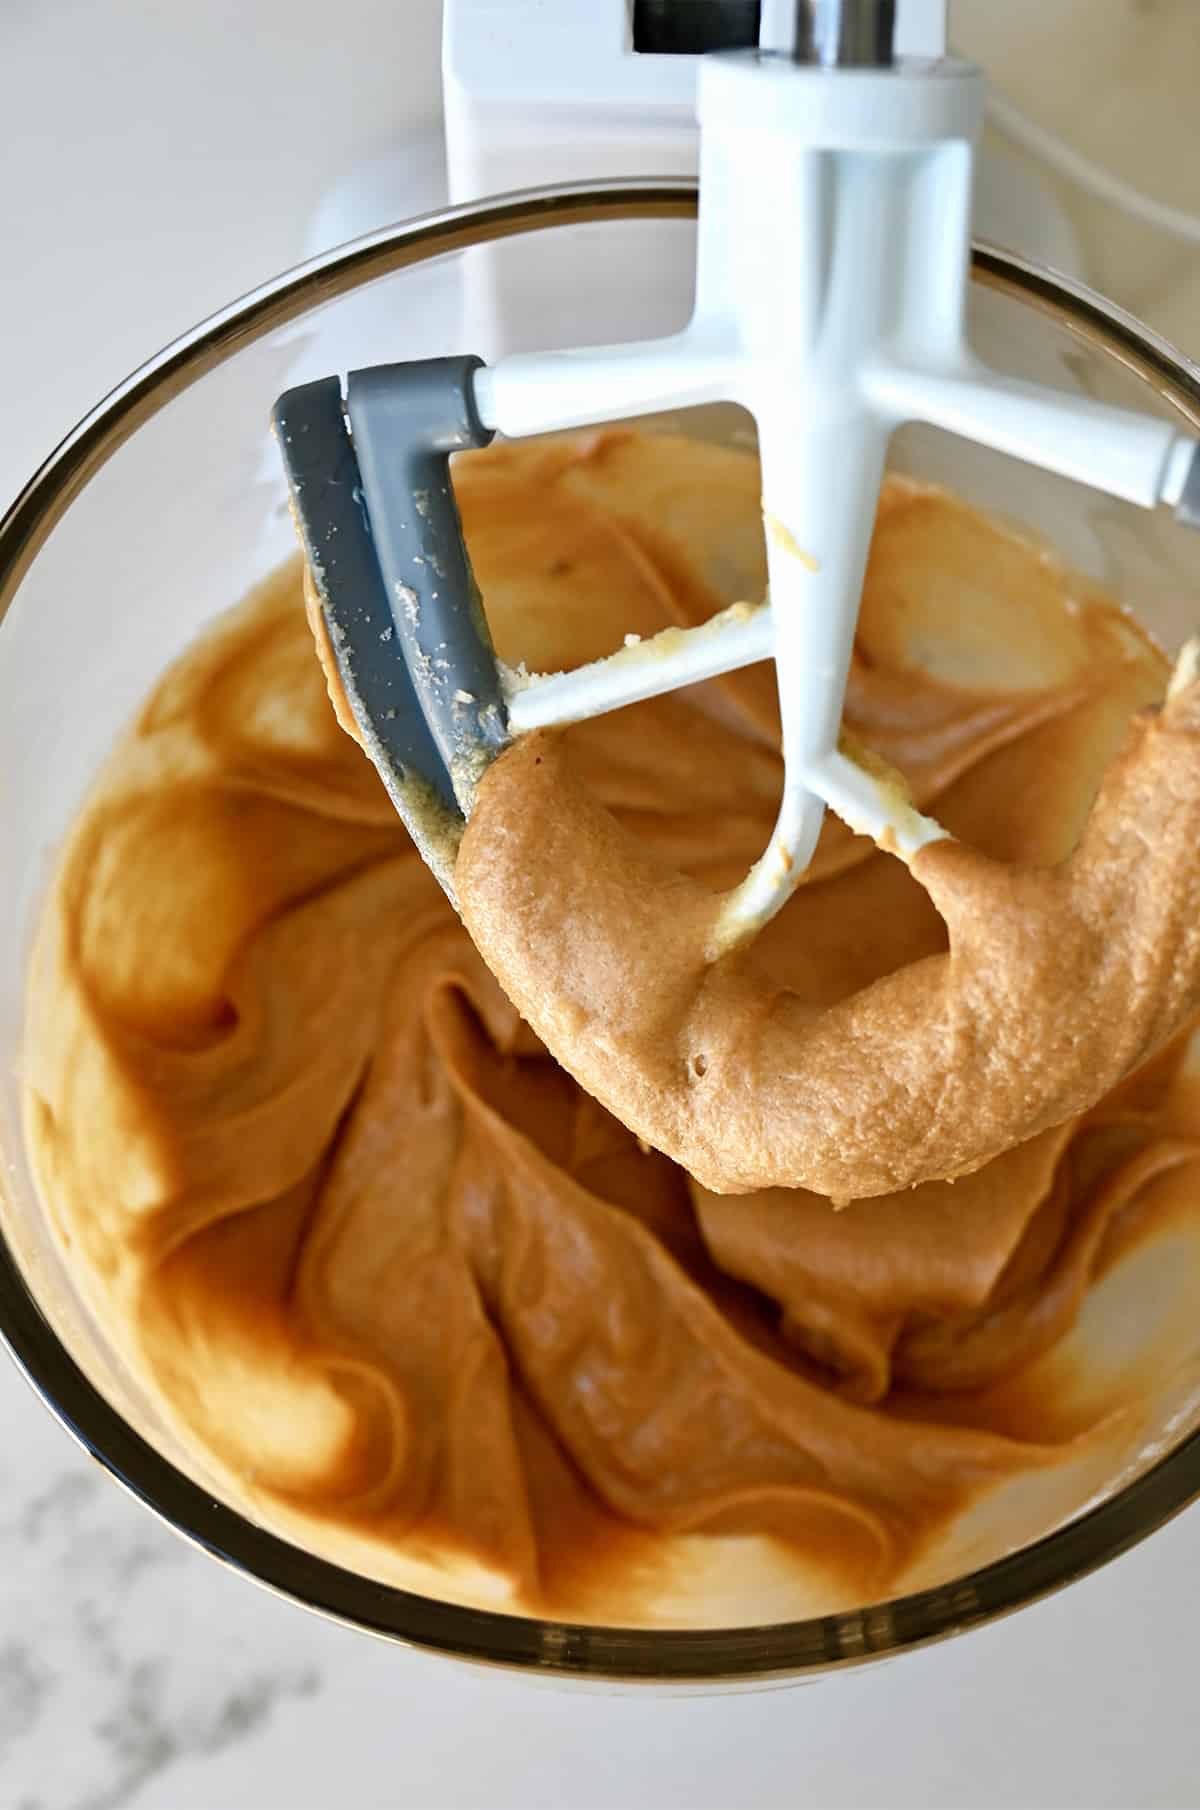 The paddle attachment of a stand mixer coated in a sugar and peanut butter mixture above a bowl containing the same mixture.